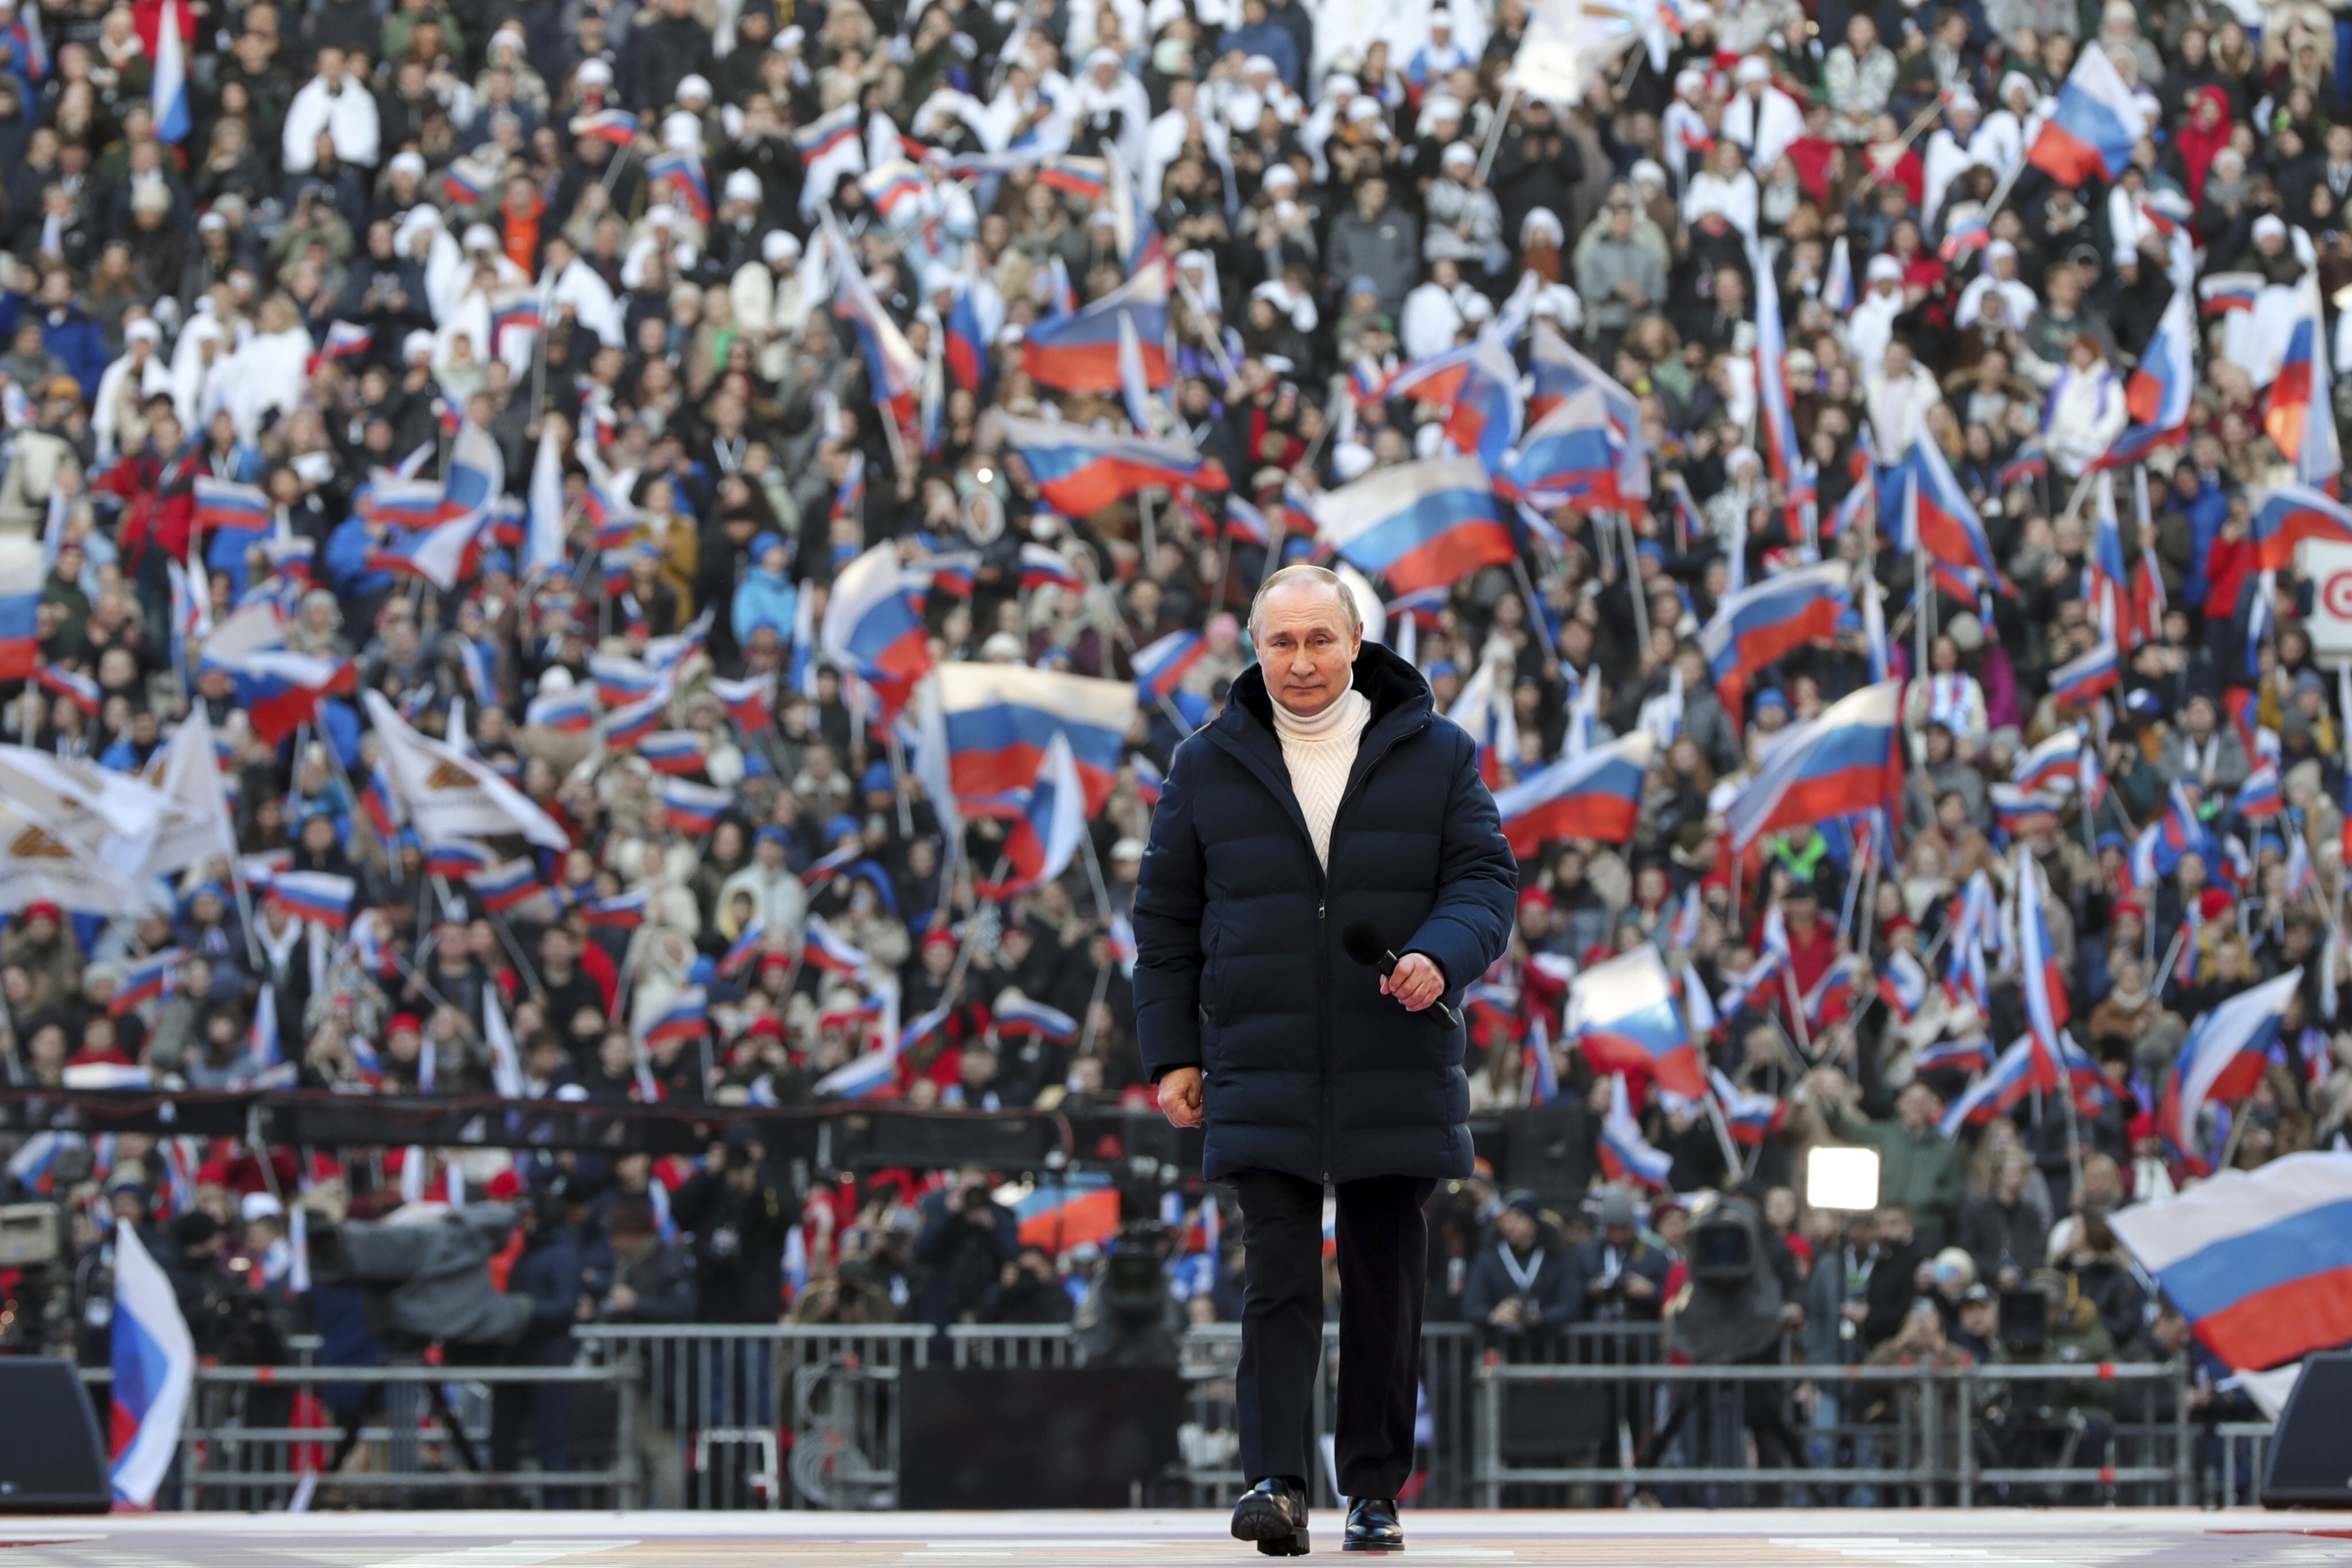 Russian President Vladimir Putin arrives to deliver his speech at the concert marking the eighth anniversary of the referendum on the state status of Crimea and Sevastopol and its reunification with Russia, in Moscow on March 18. Photo: Sputnik / AP